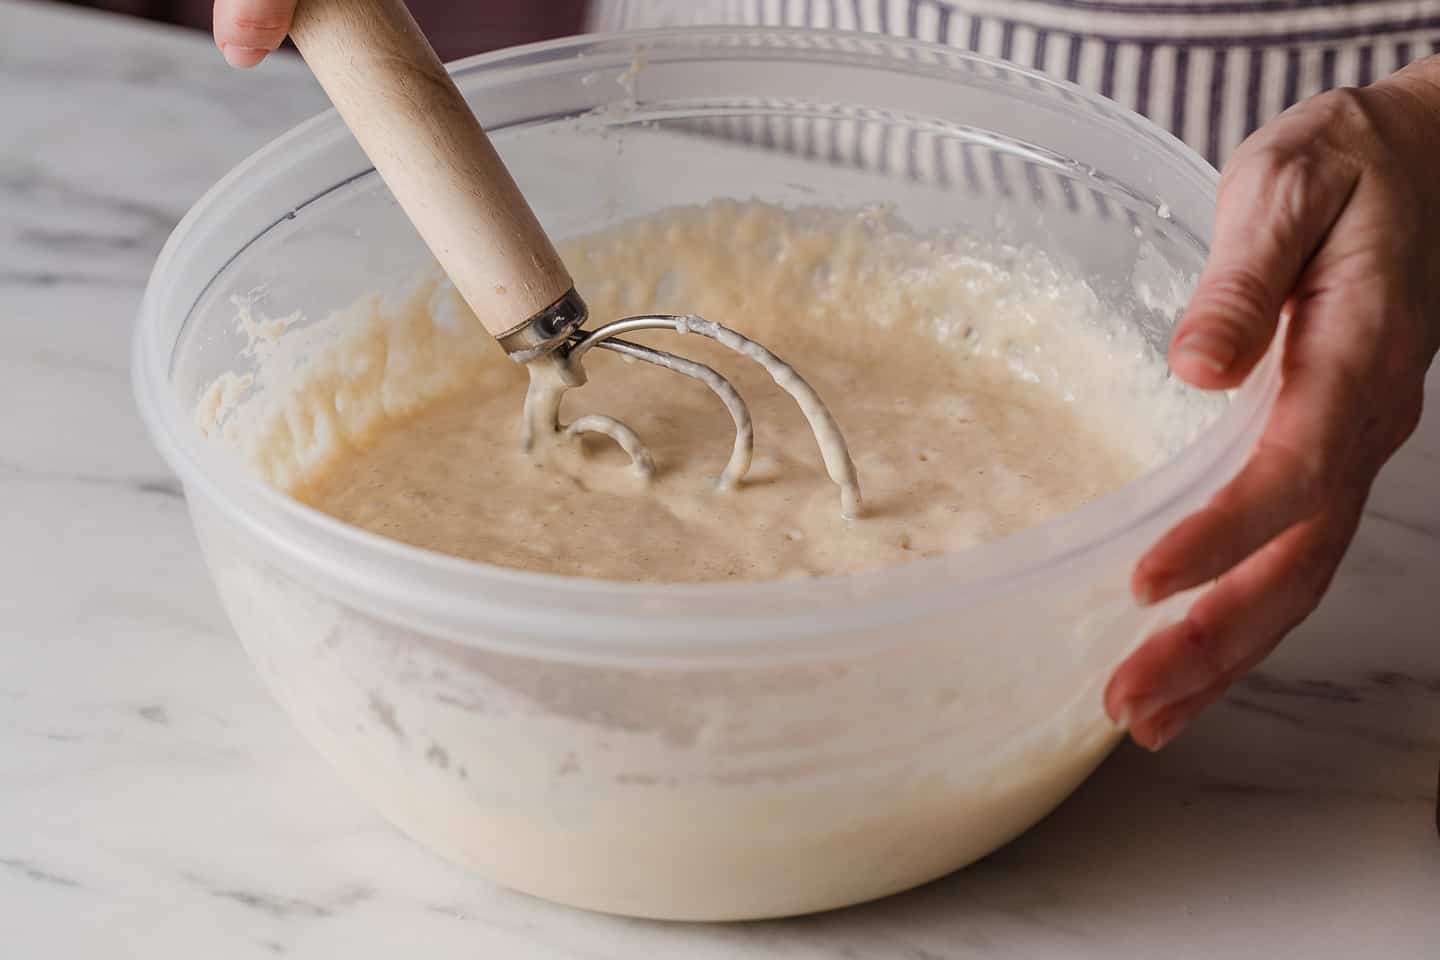 Mixing batter with a whisk.